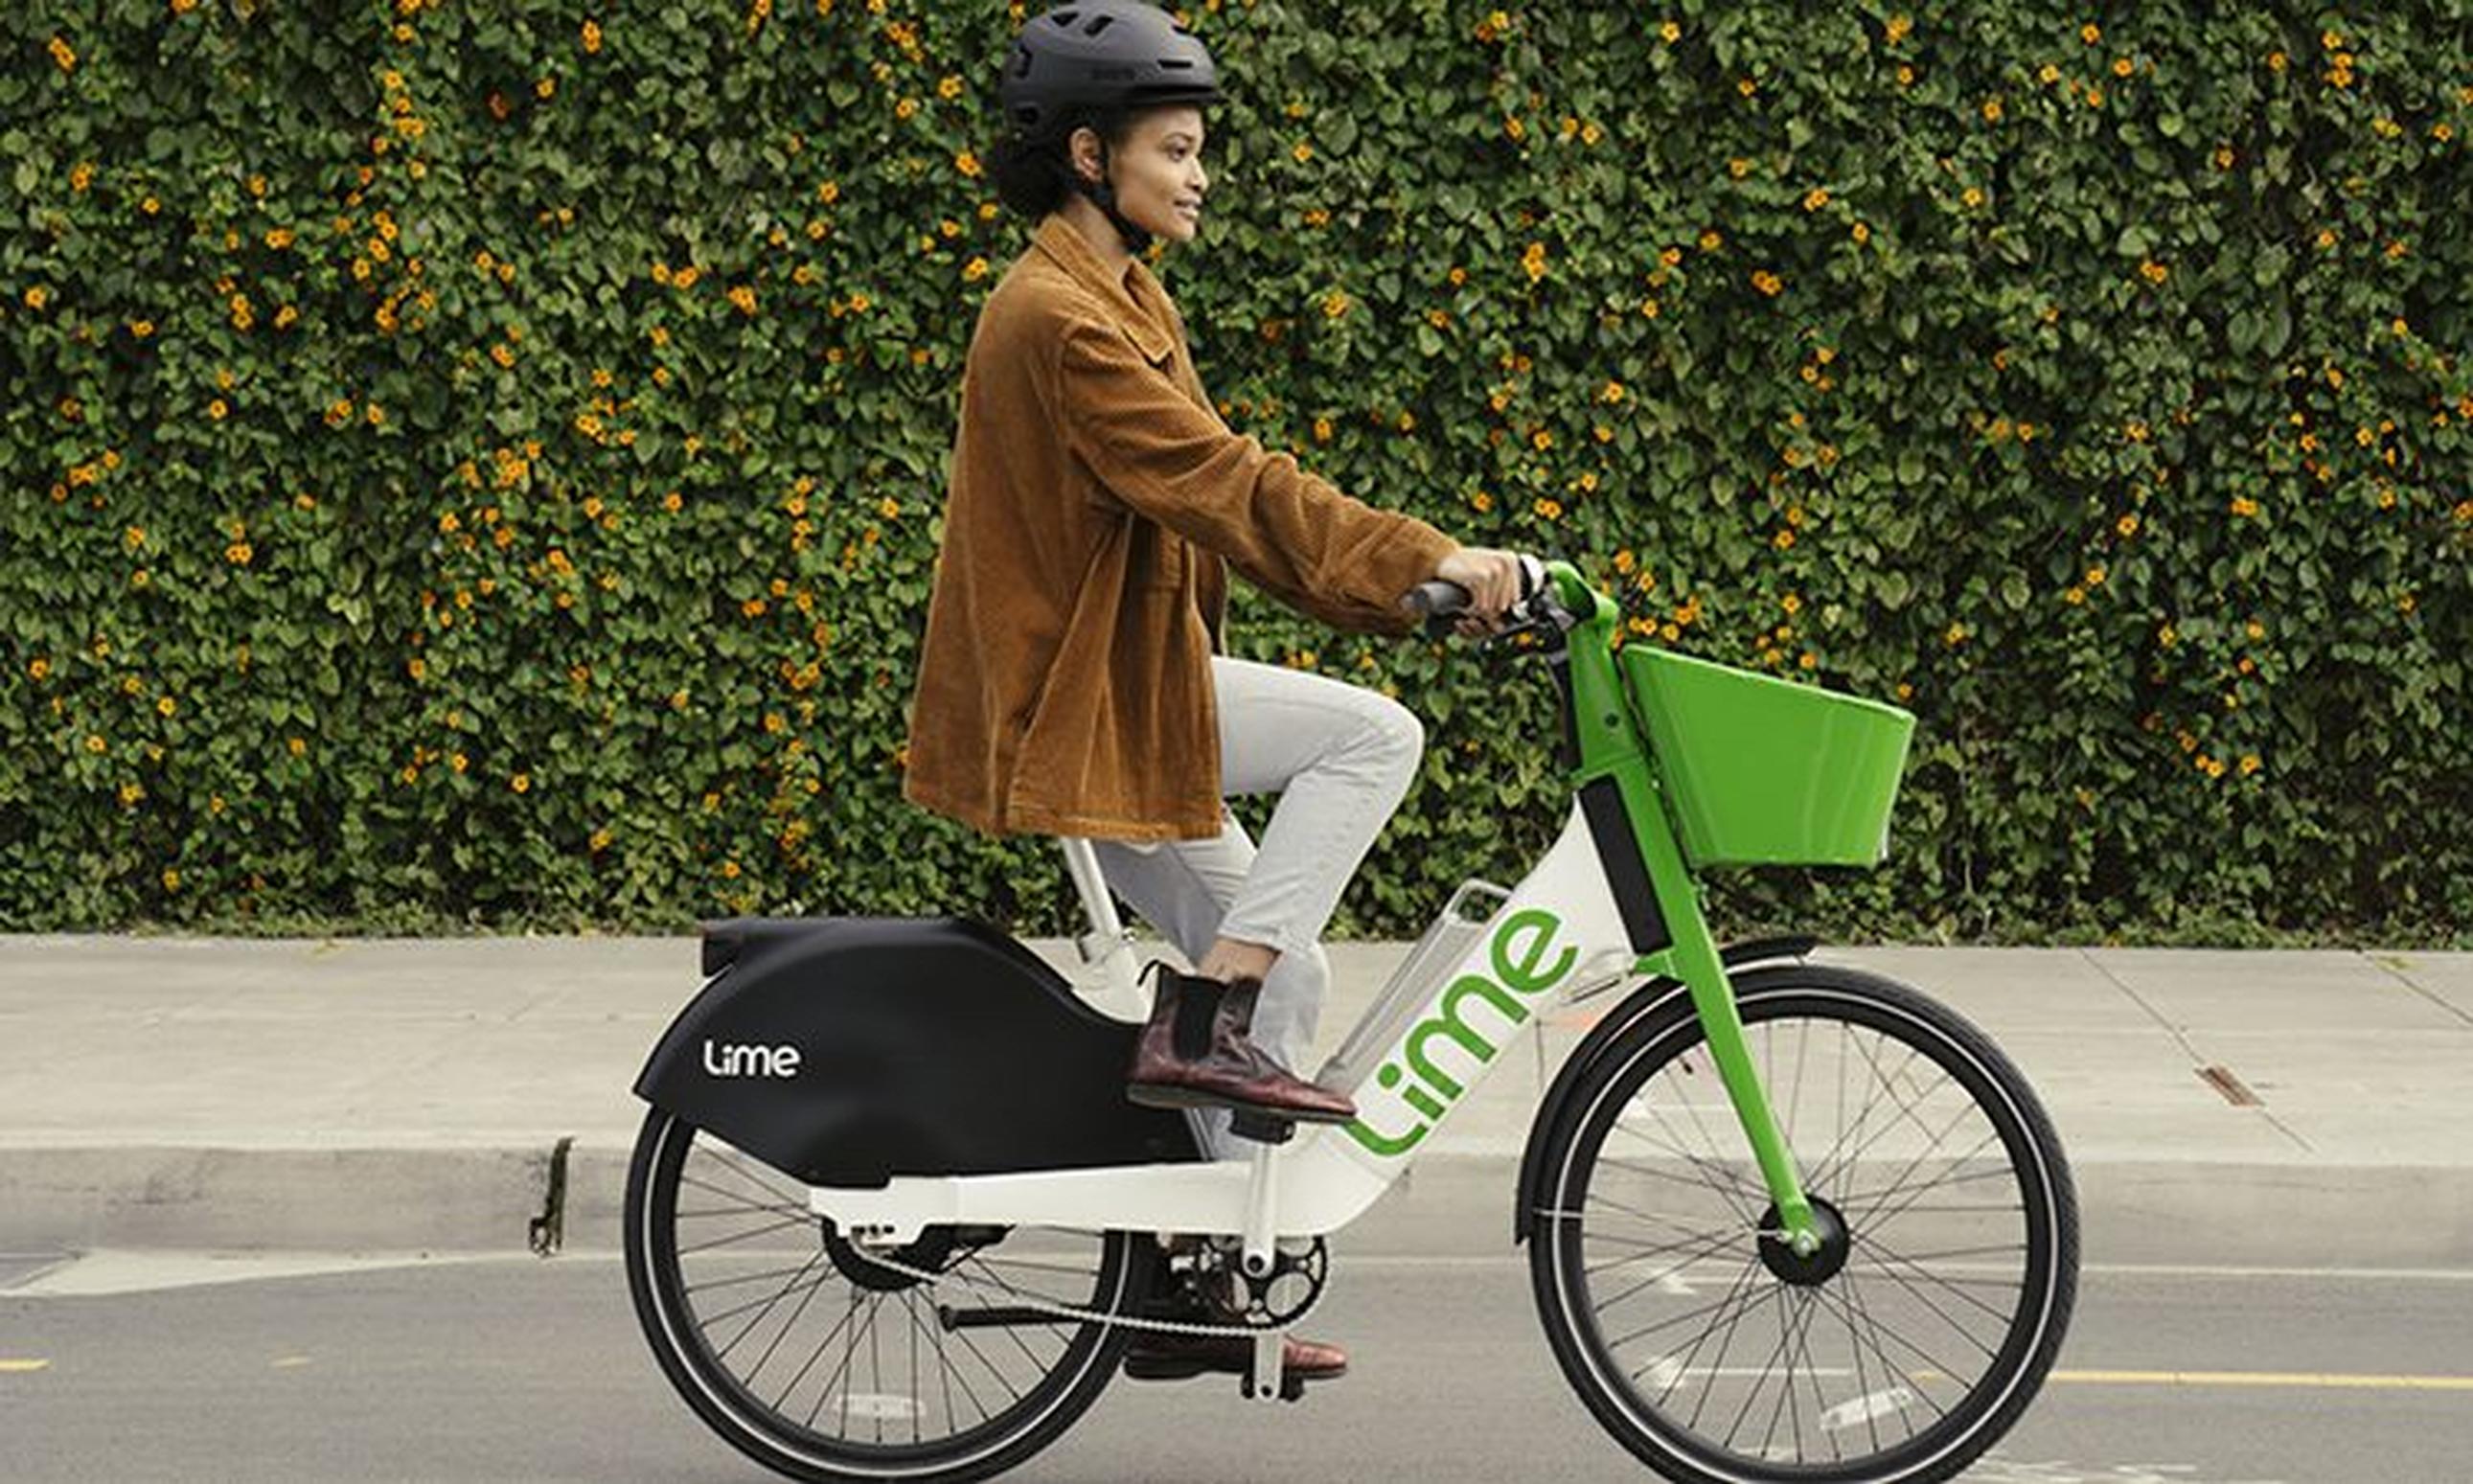 Lime said there have more than 12 million trips were made on its bikes by 1.25 million different customers in London